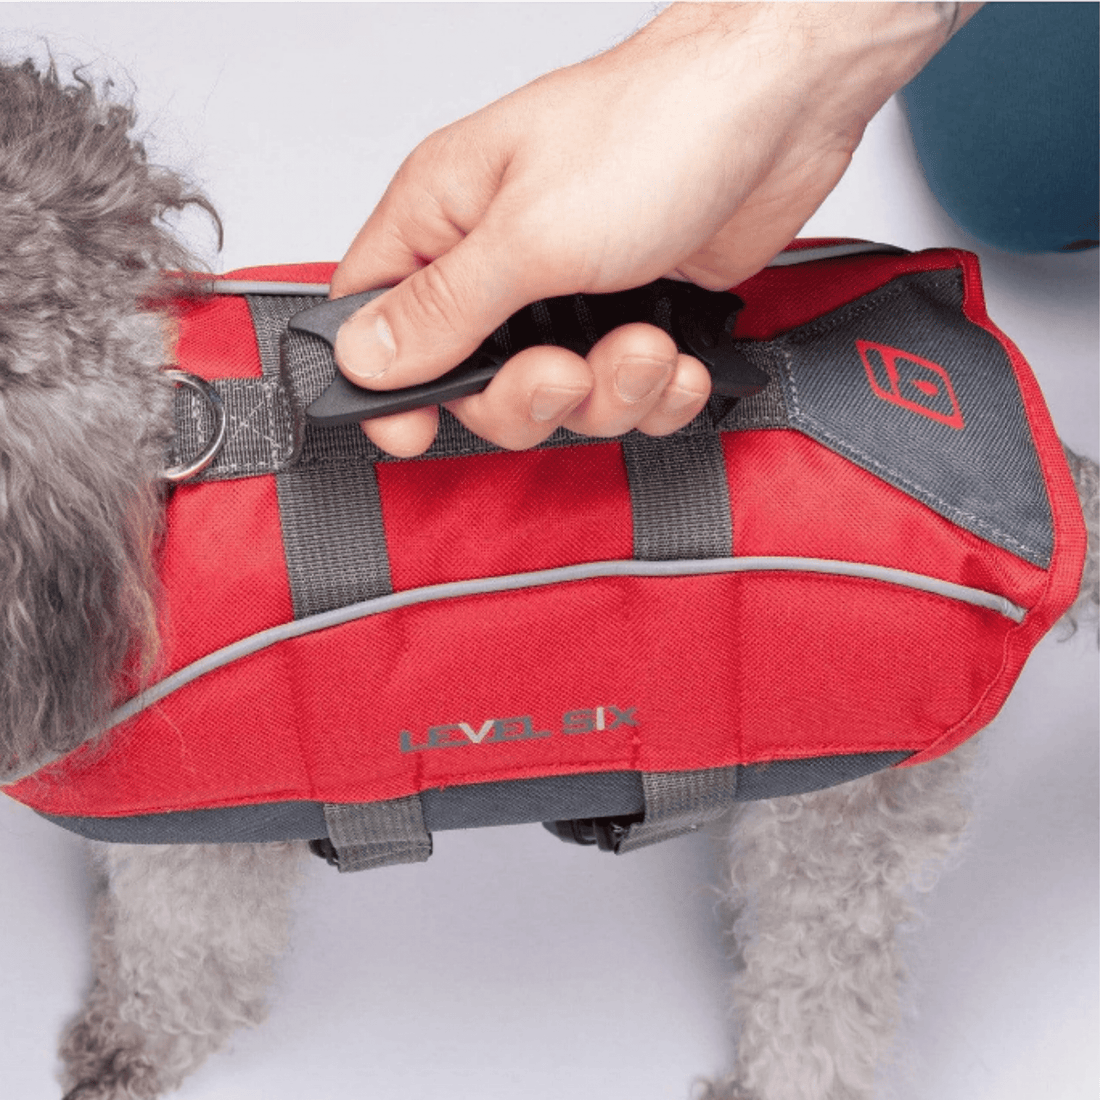 Ottawa Valley Air Paddle Rover Floater - Canine PFD